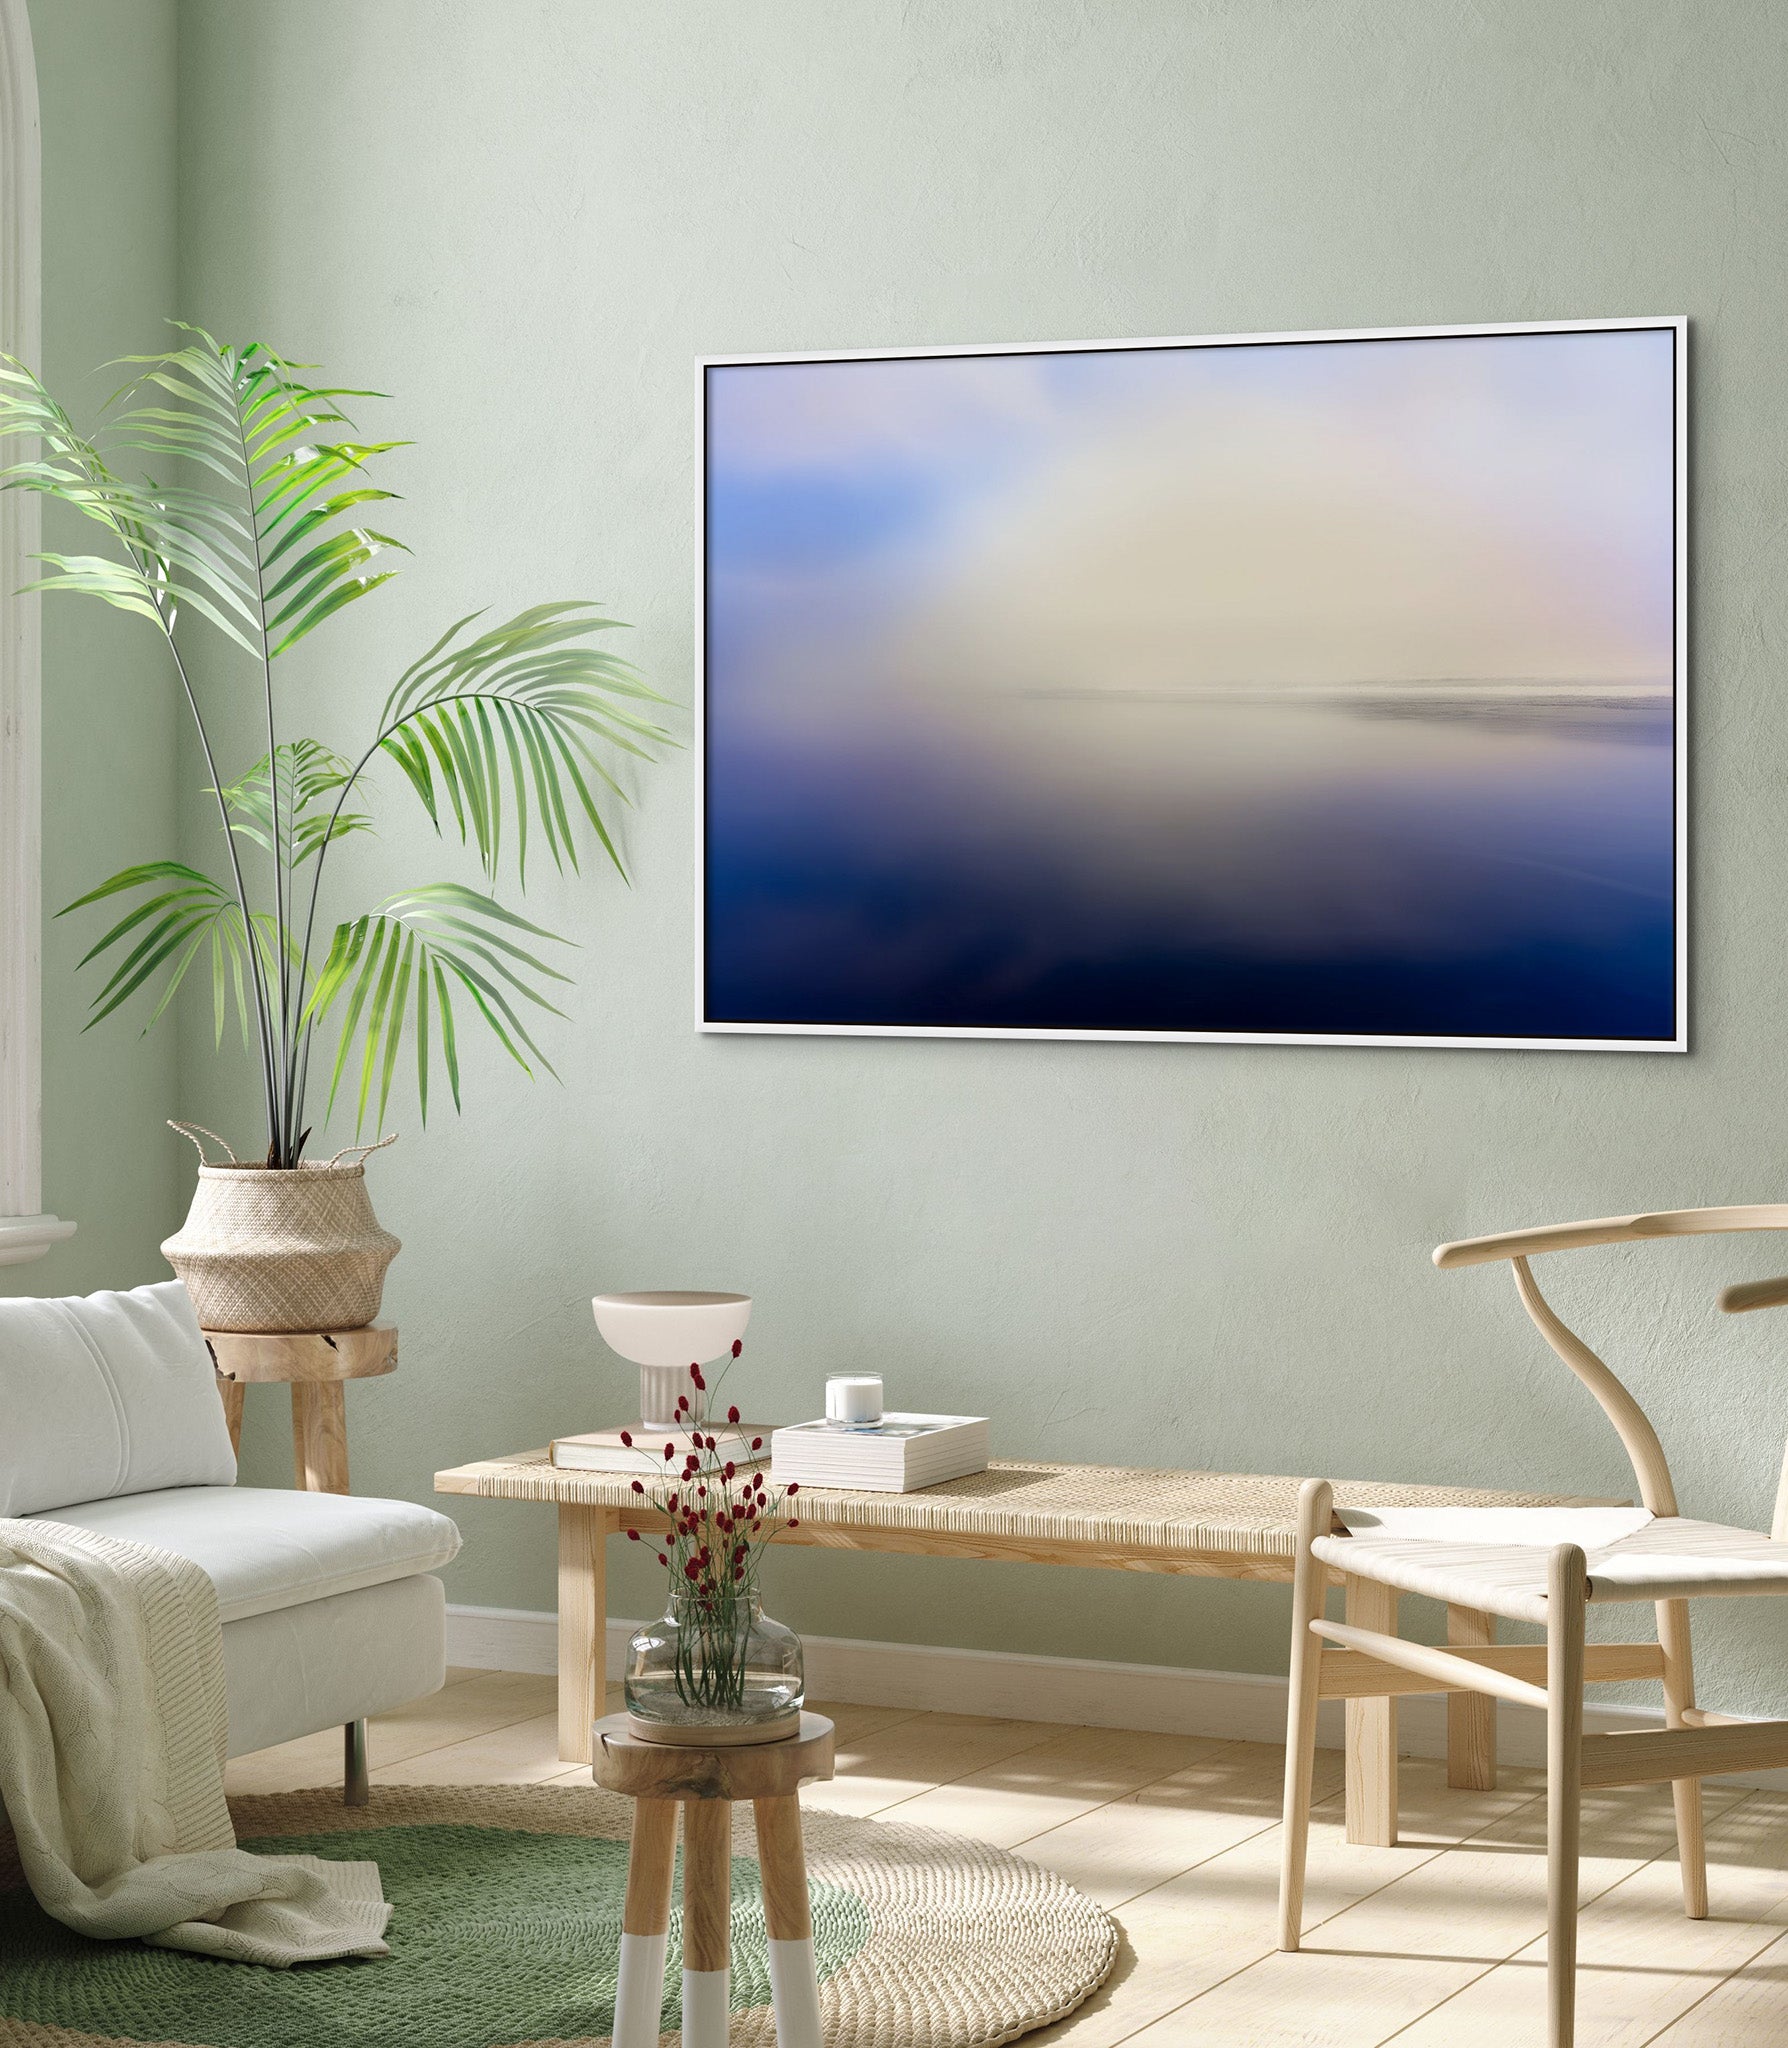 Picture hanging on the wall of a living room. The picture is a fine art landscape photograph titled "Go Toward the Light" by Cameron Dreaux of Dreaux Fine Art.